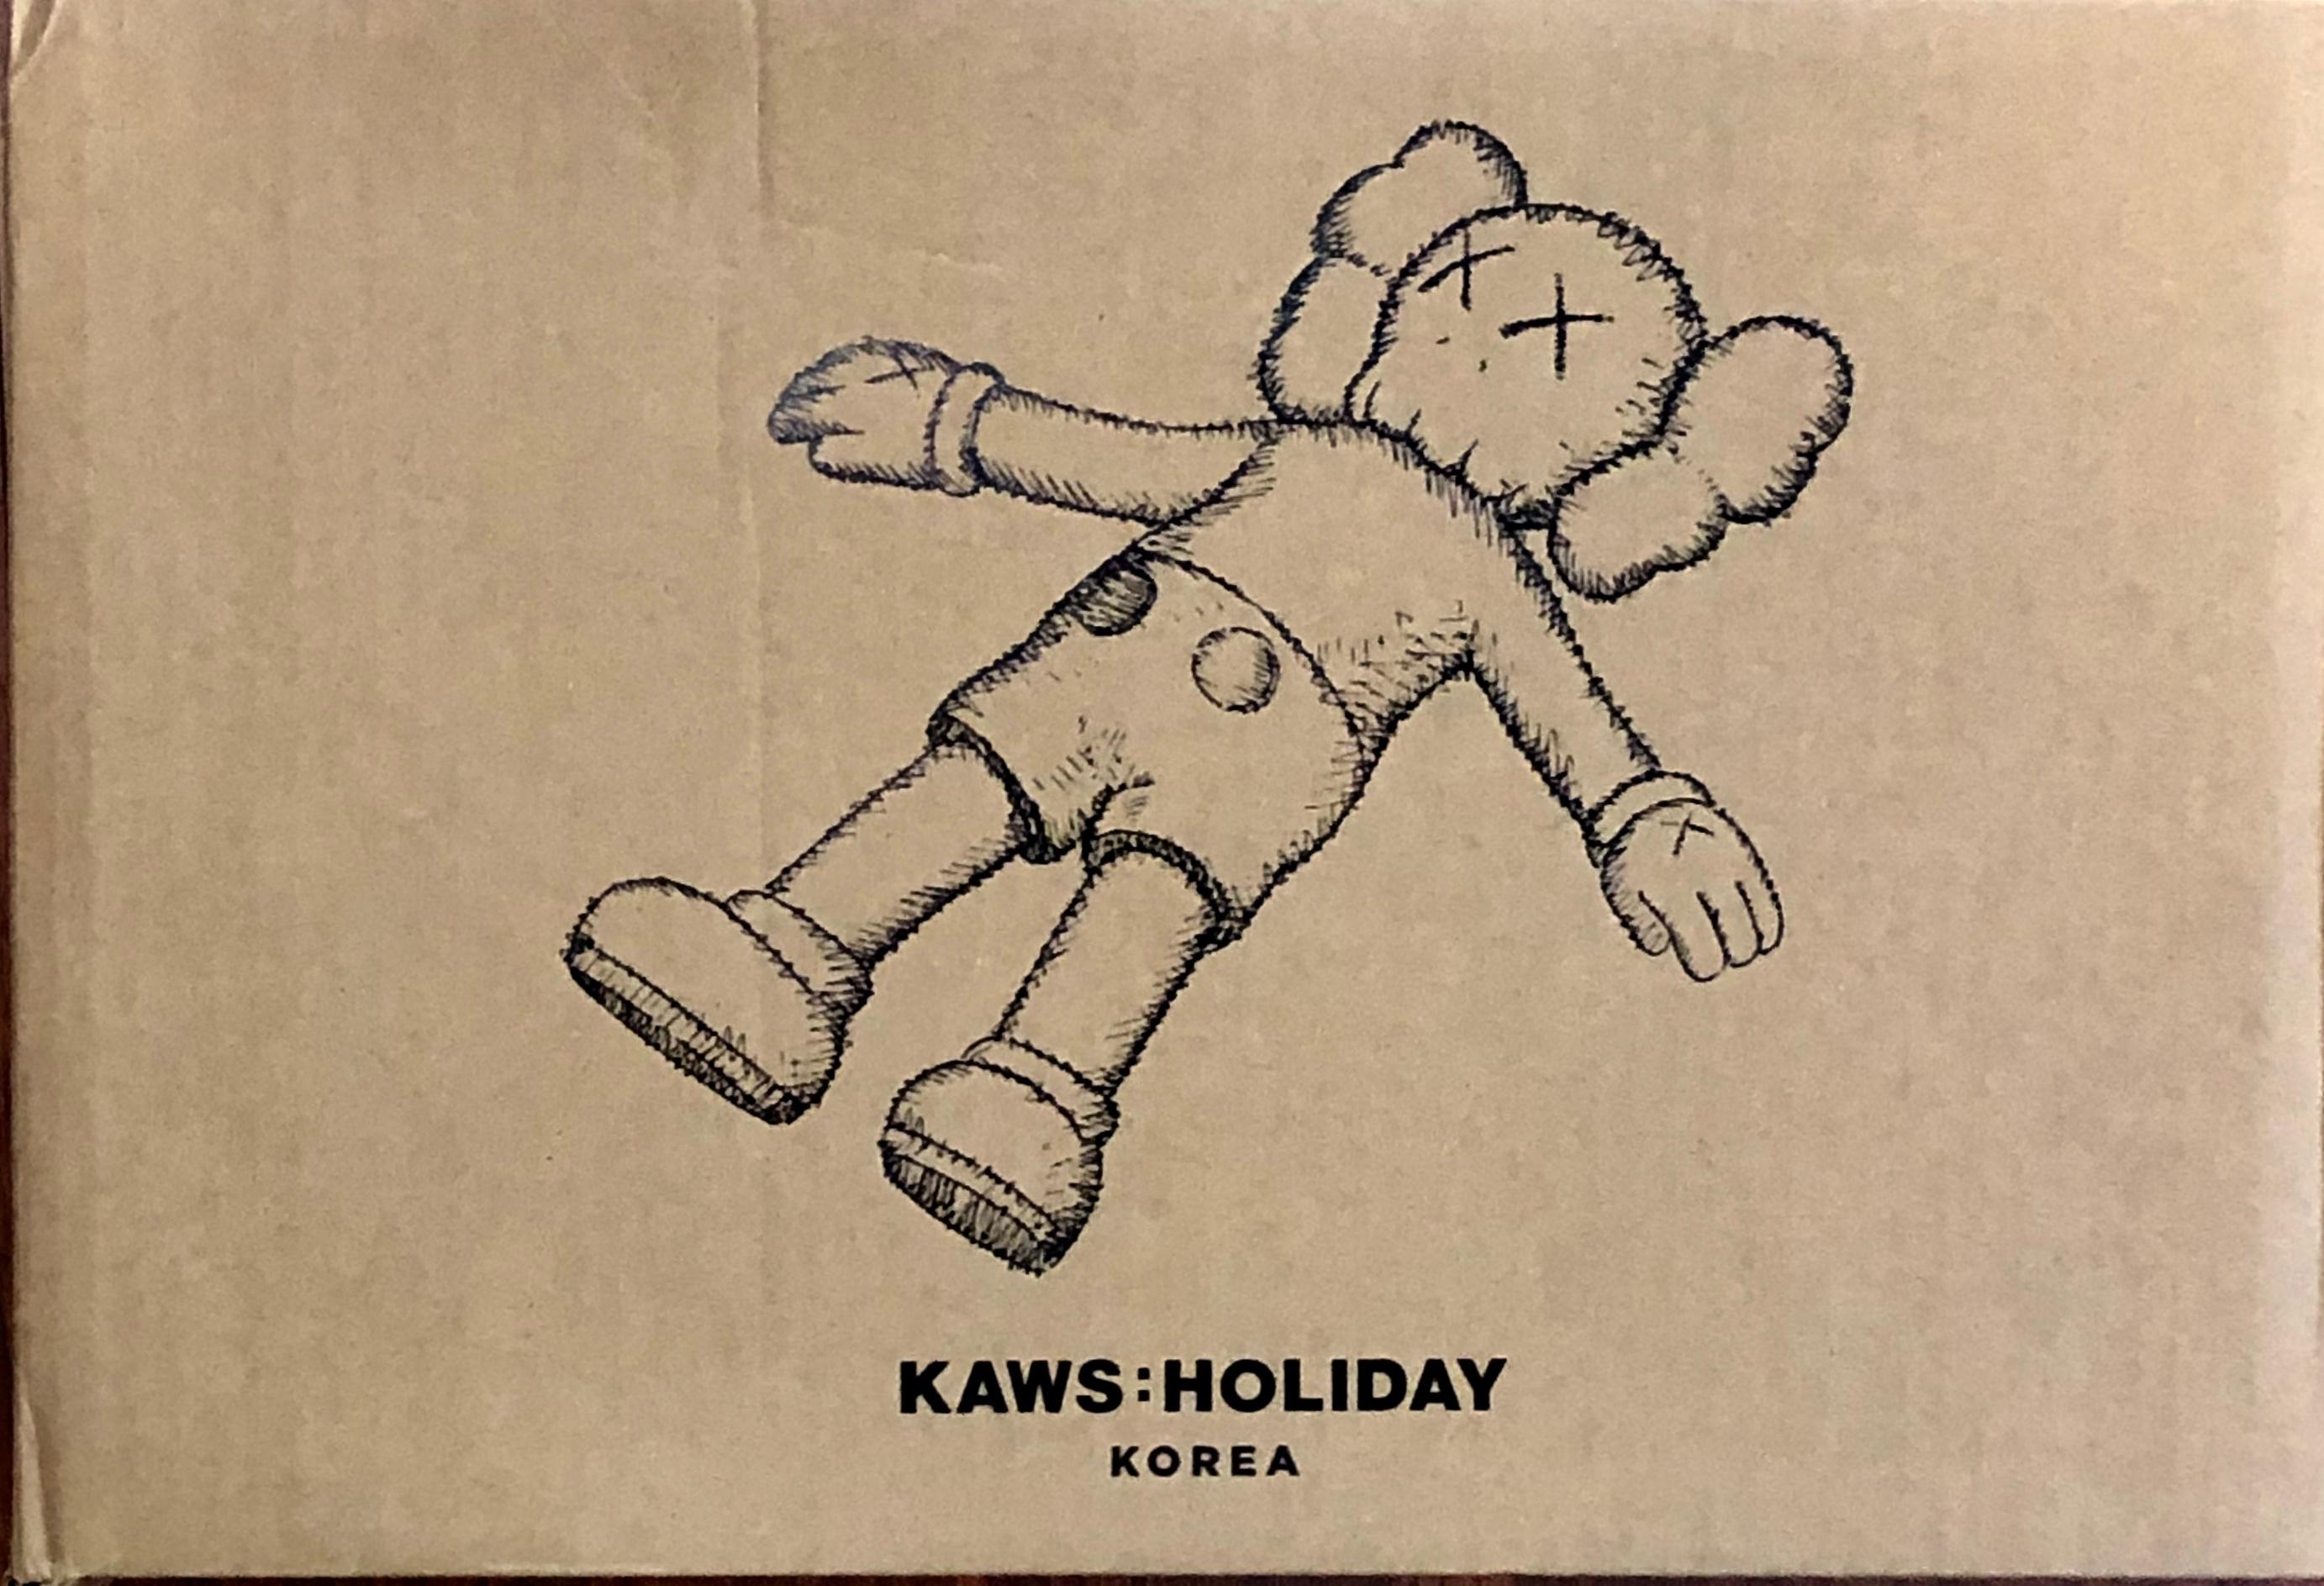 KAWS Holiday Floating Bed 
This large inflatable raft was published by All Rights Reserved to commemorate the debut of a large scale KAWS floating figure for Seoul’s Seokchon Lake during summer 2018. New in its original packaging. Rare brown color.